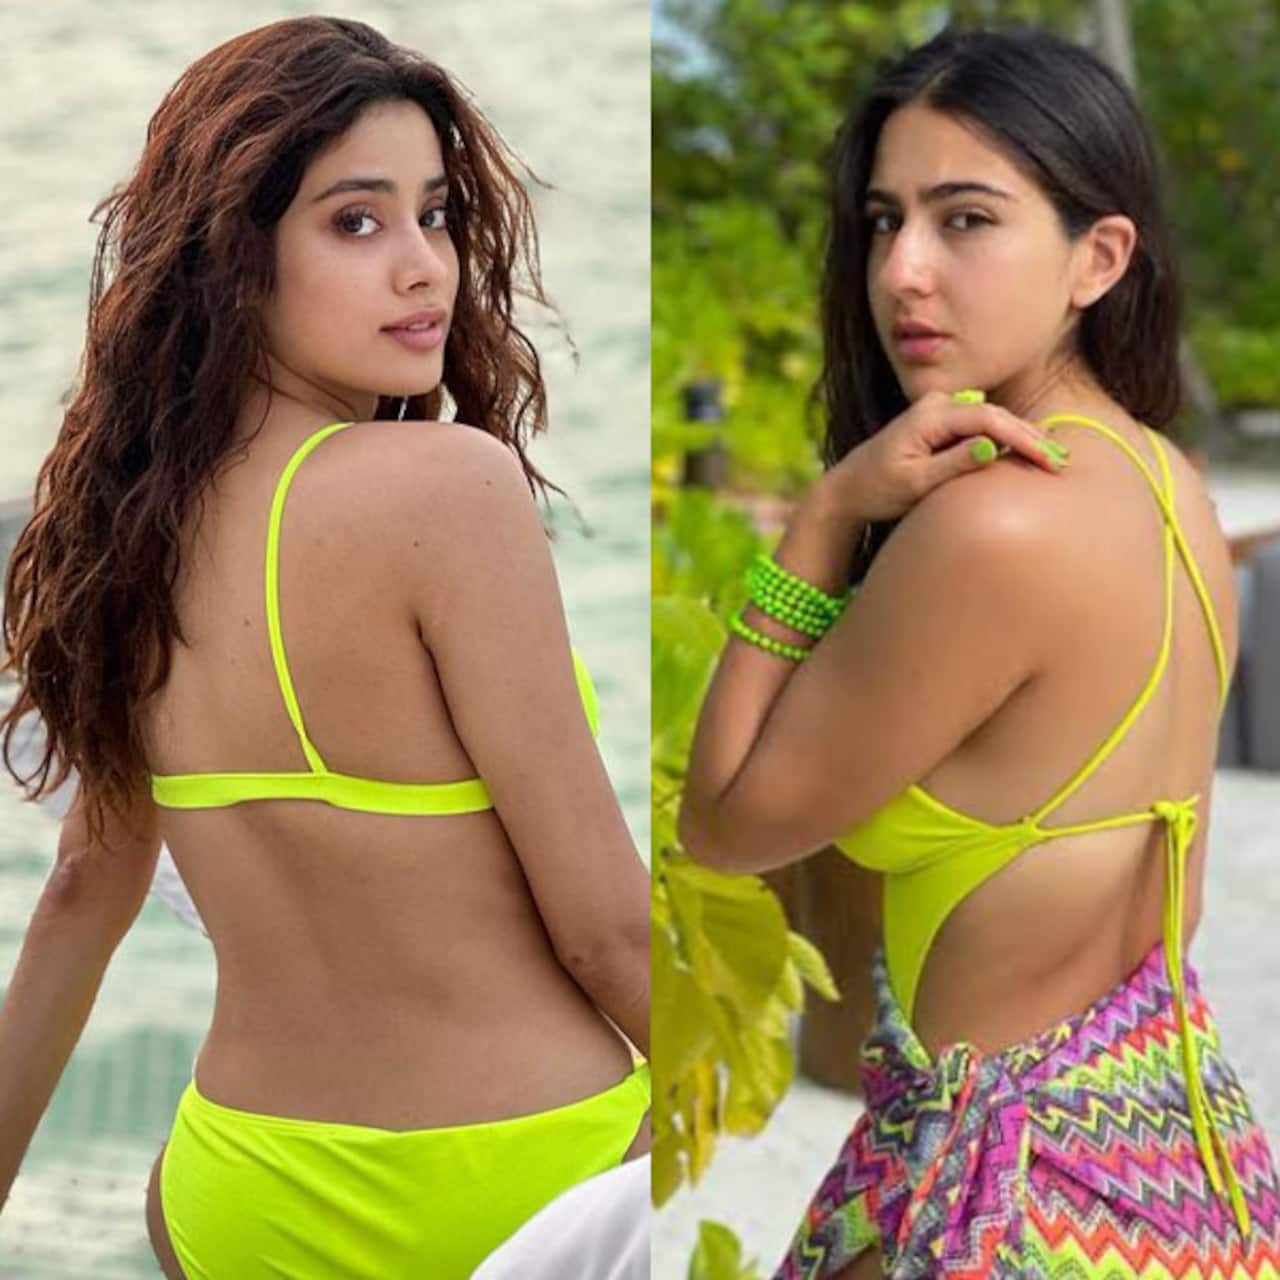 dreigen Bediende herder Janhvi Kapoor to Sara Ali Khan: Bollywood divas' oh-so-hot pictures in neon  bikini will warm you up in the winter chill